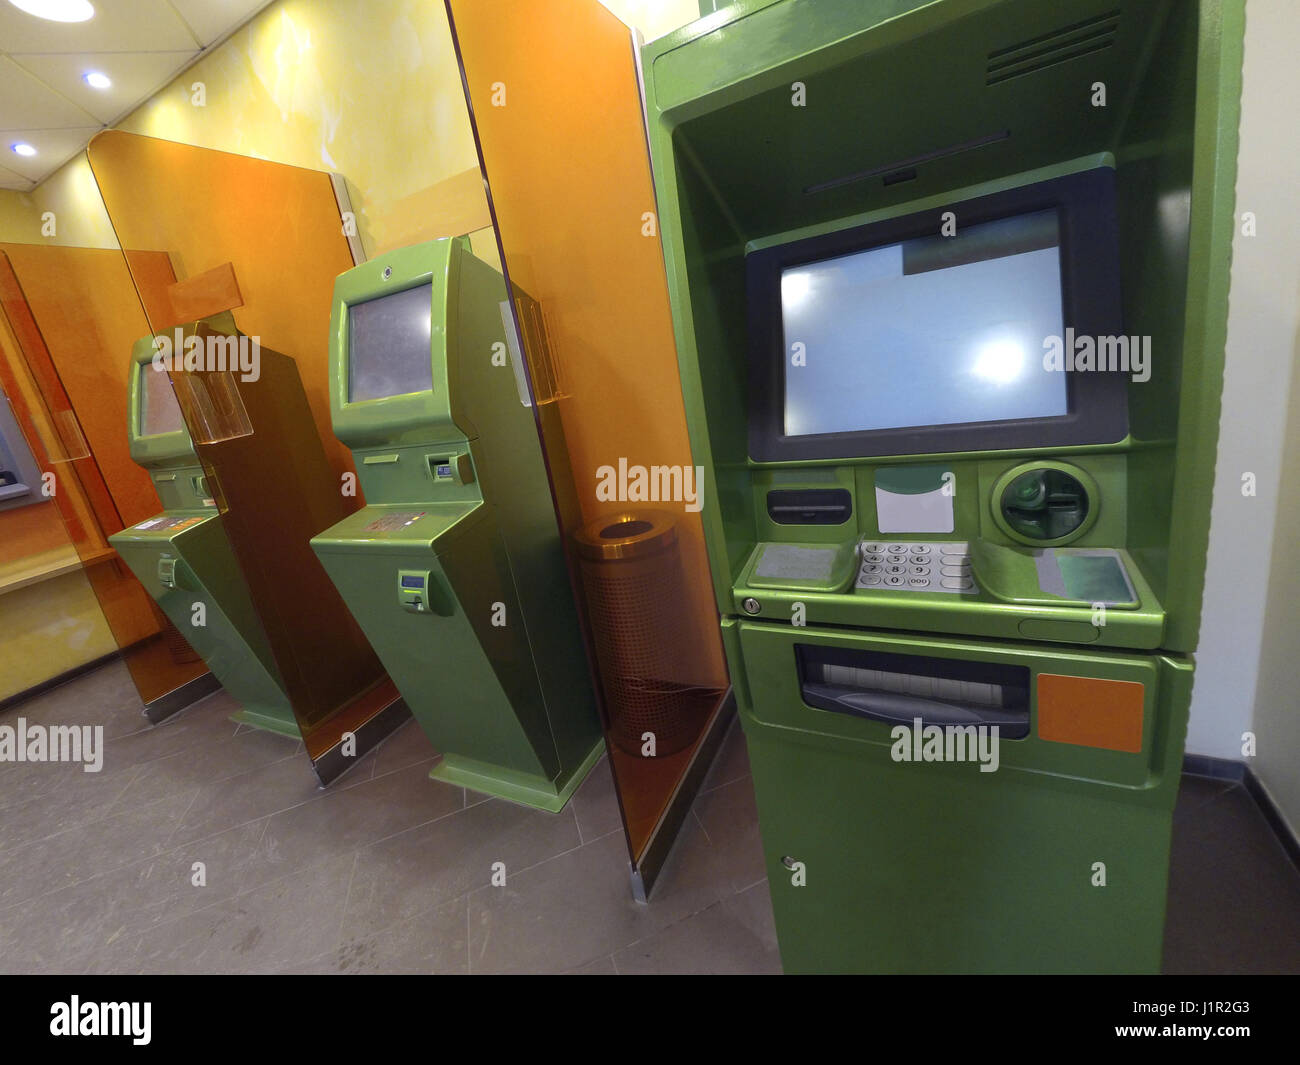 Three cash dispensers for issuing money green ready for work Stock Photo